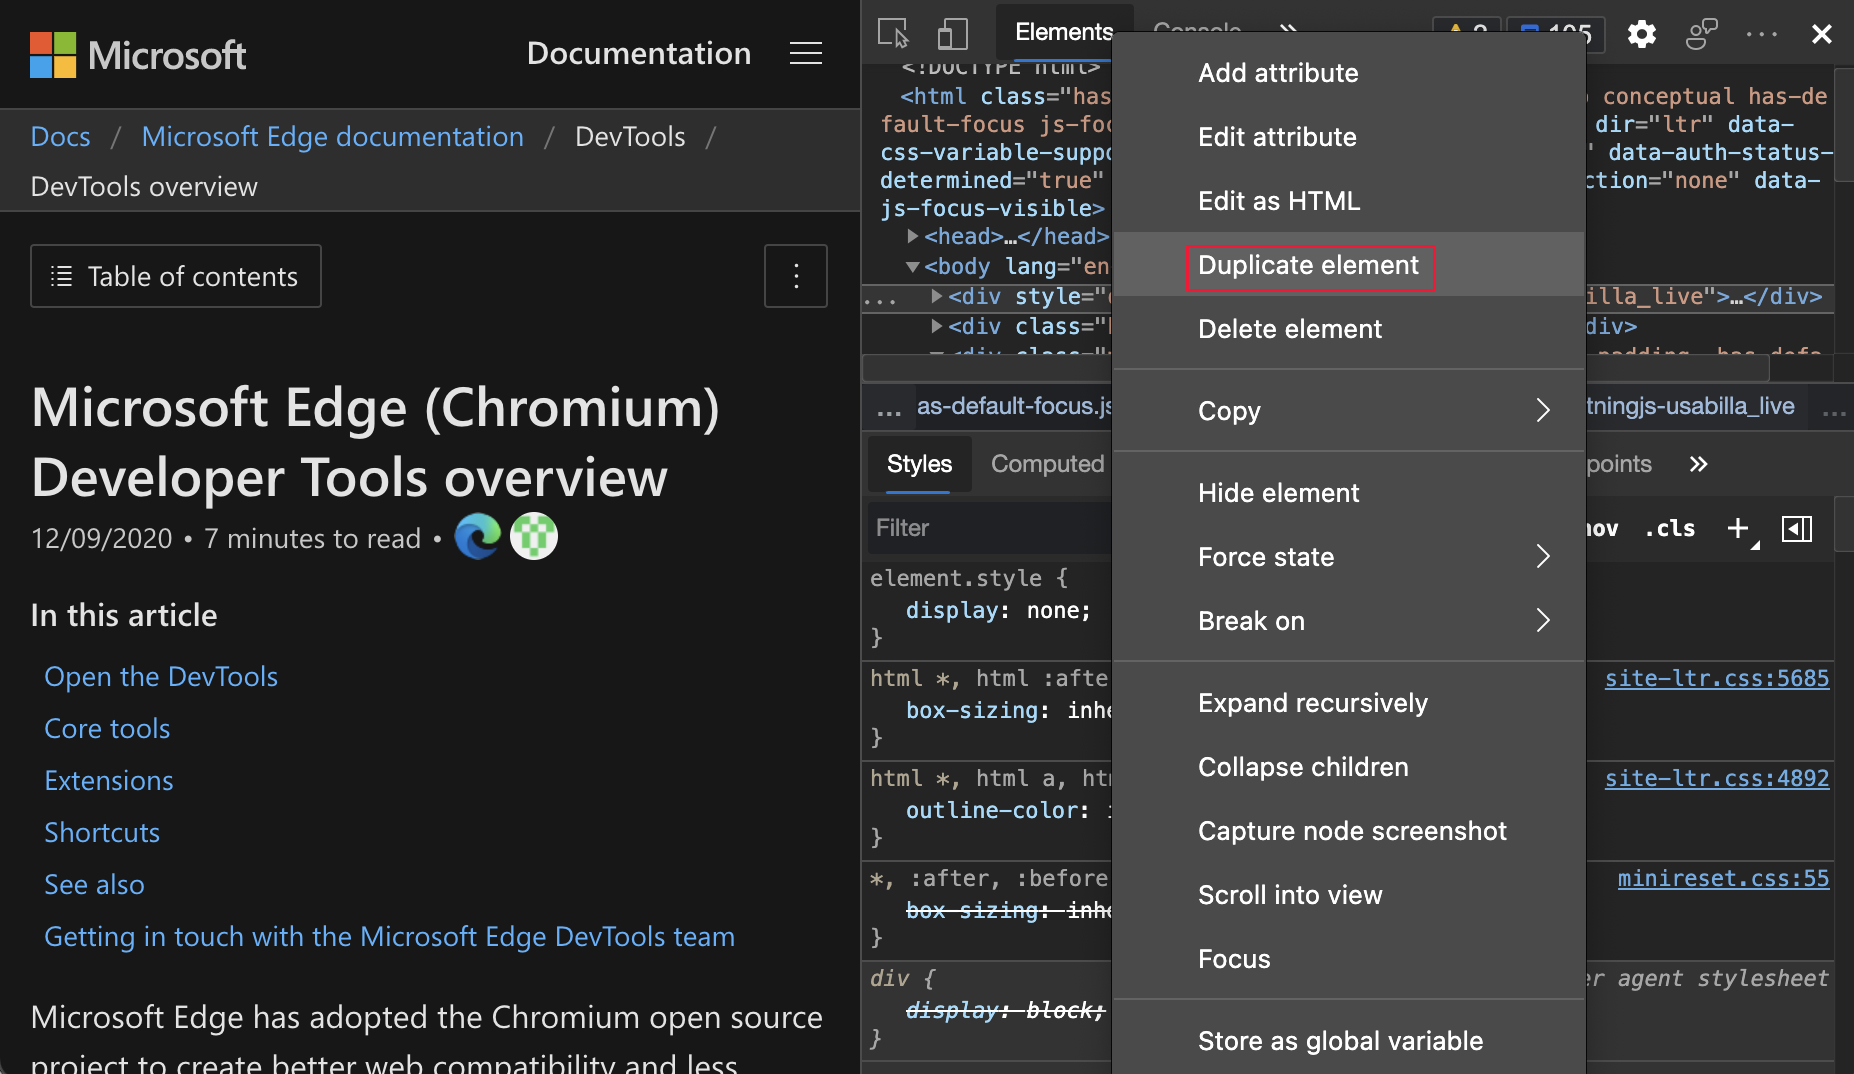 The Duplicate element is highlighted in the context menu on an element in the Elements tool